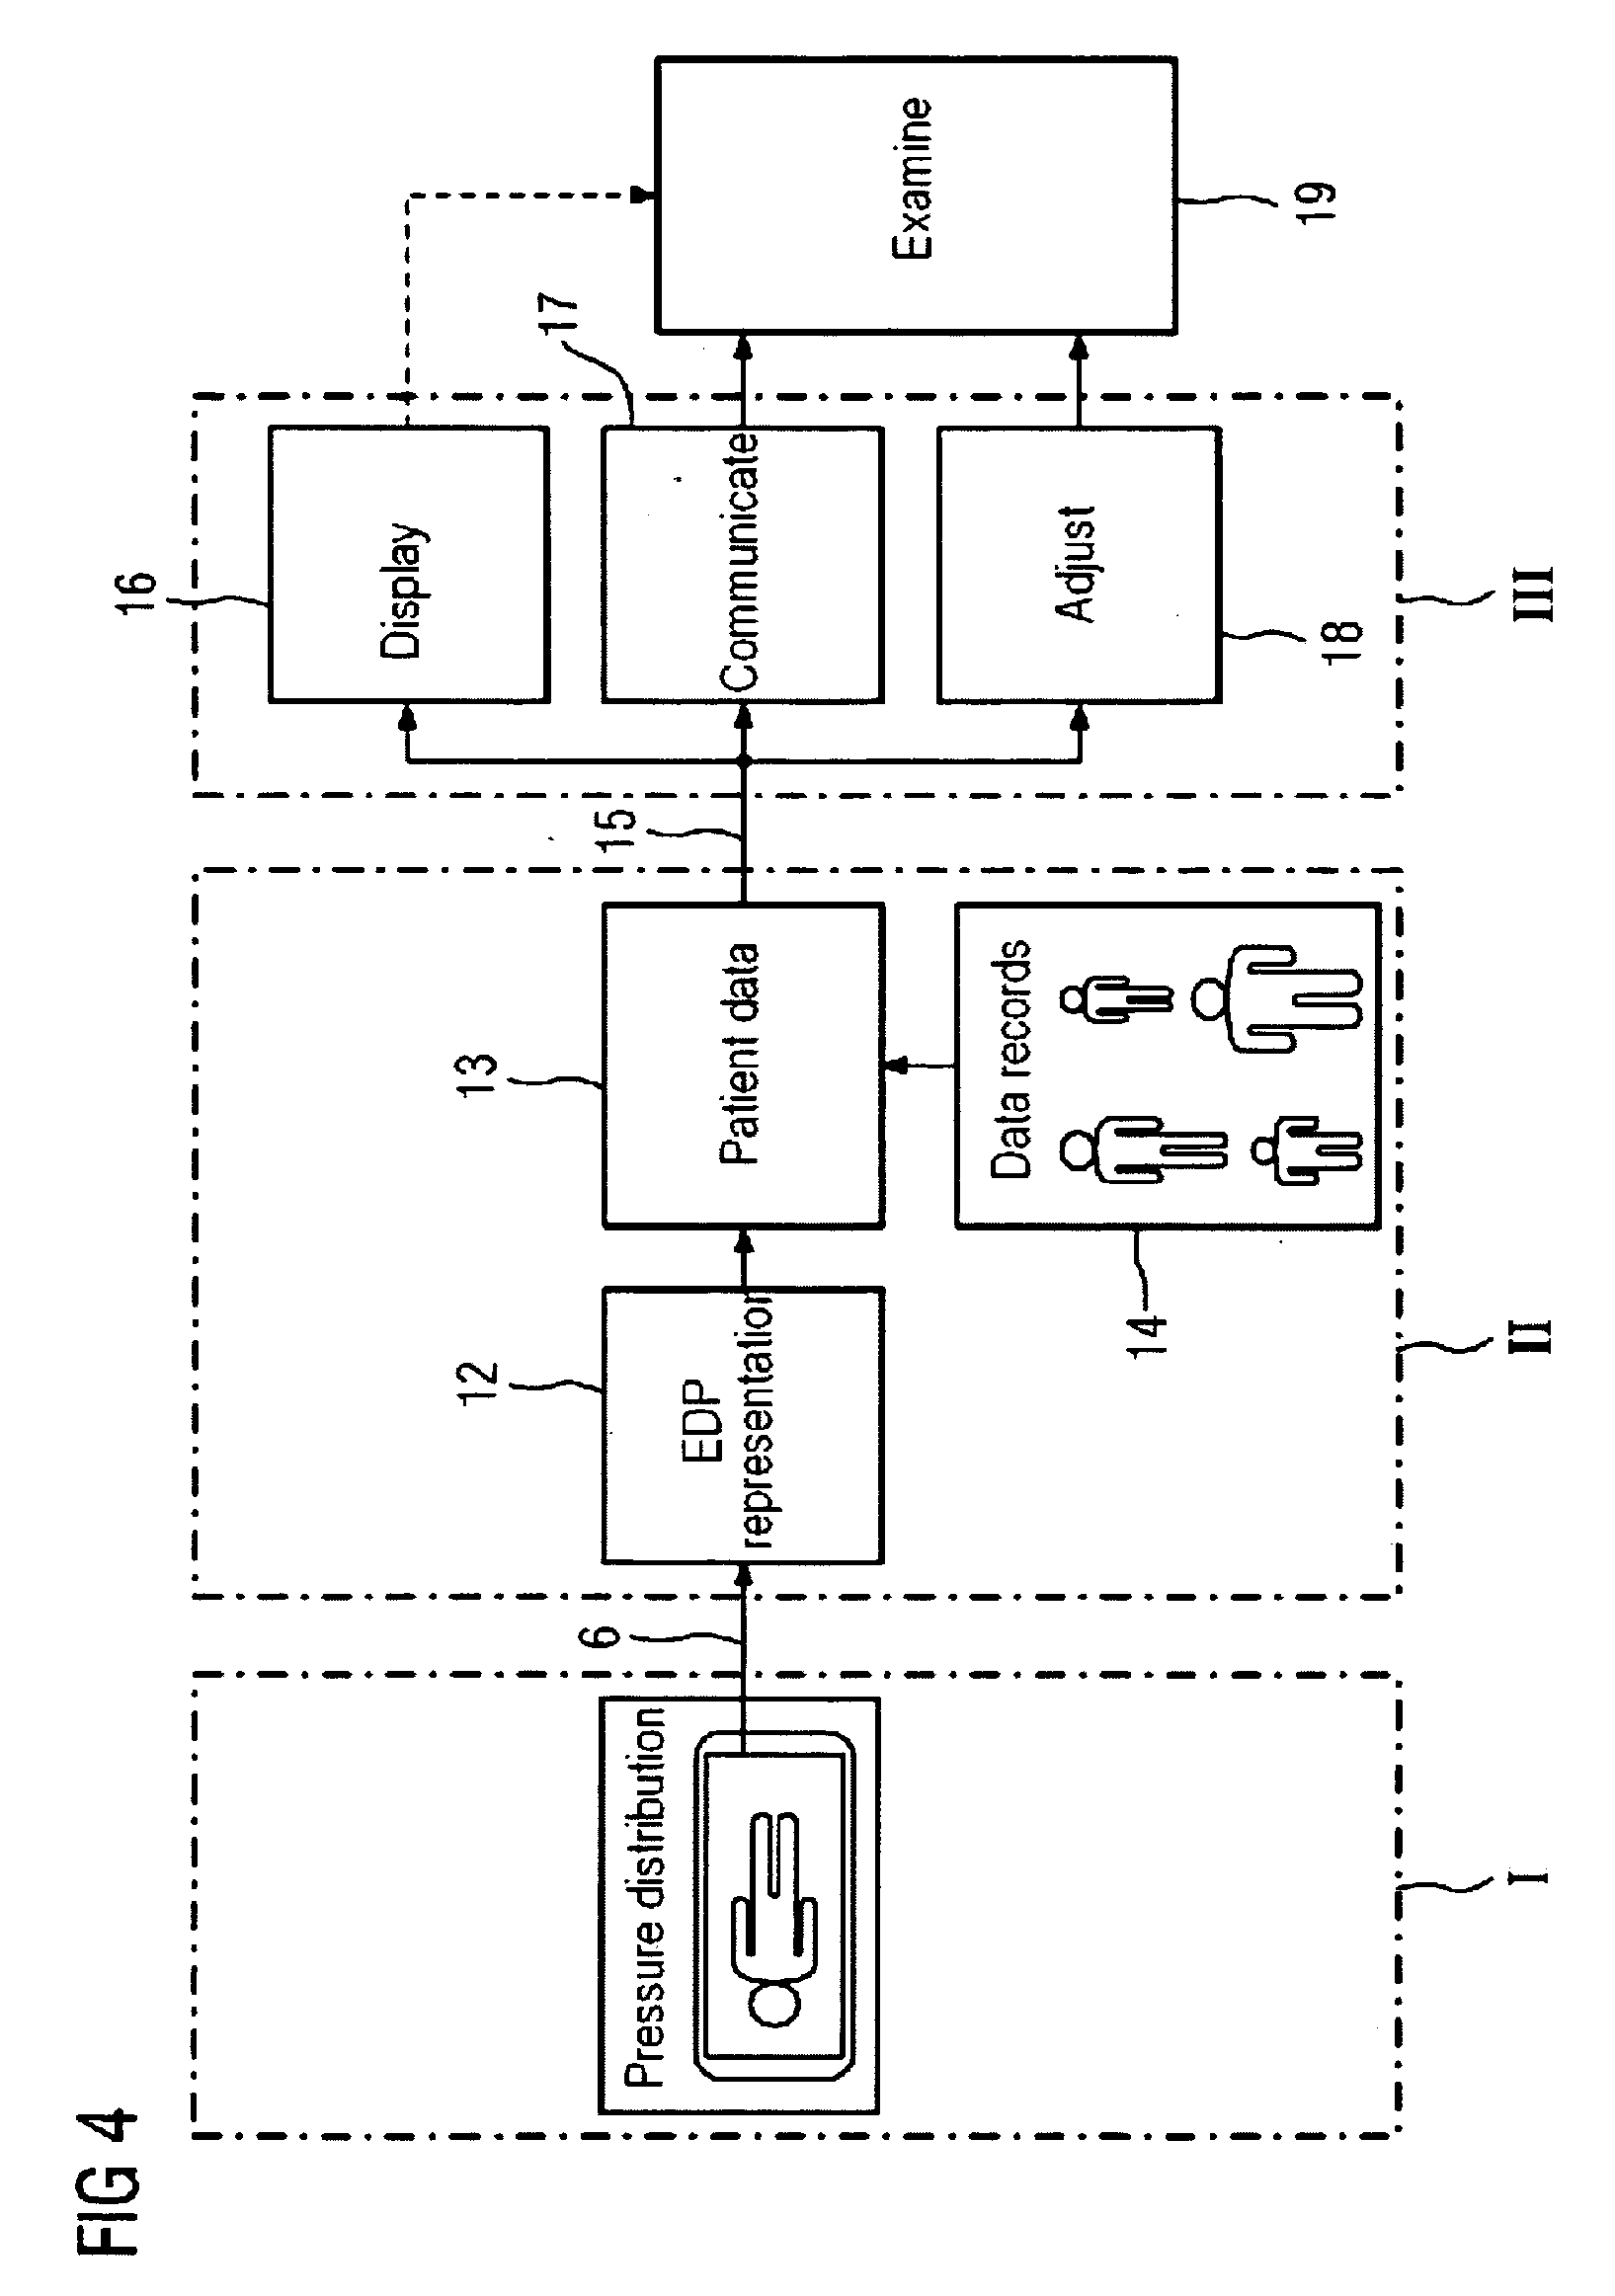 System or method for examining a patient by means of an imaging medical diagnostic equipment